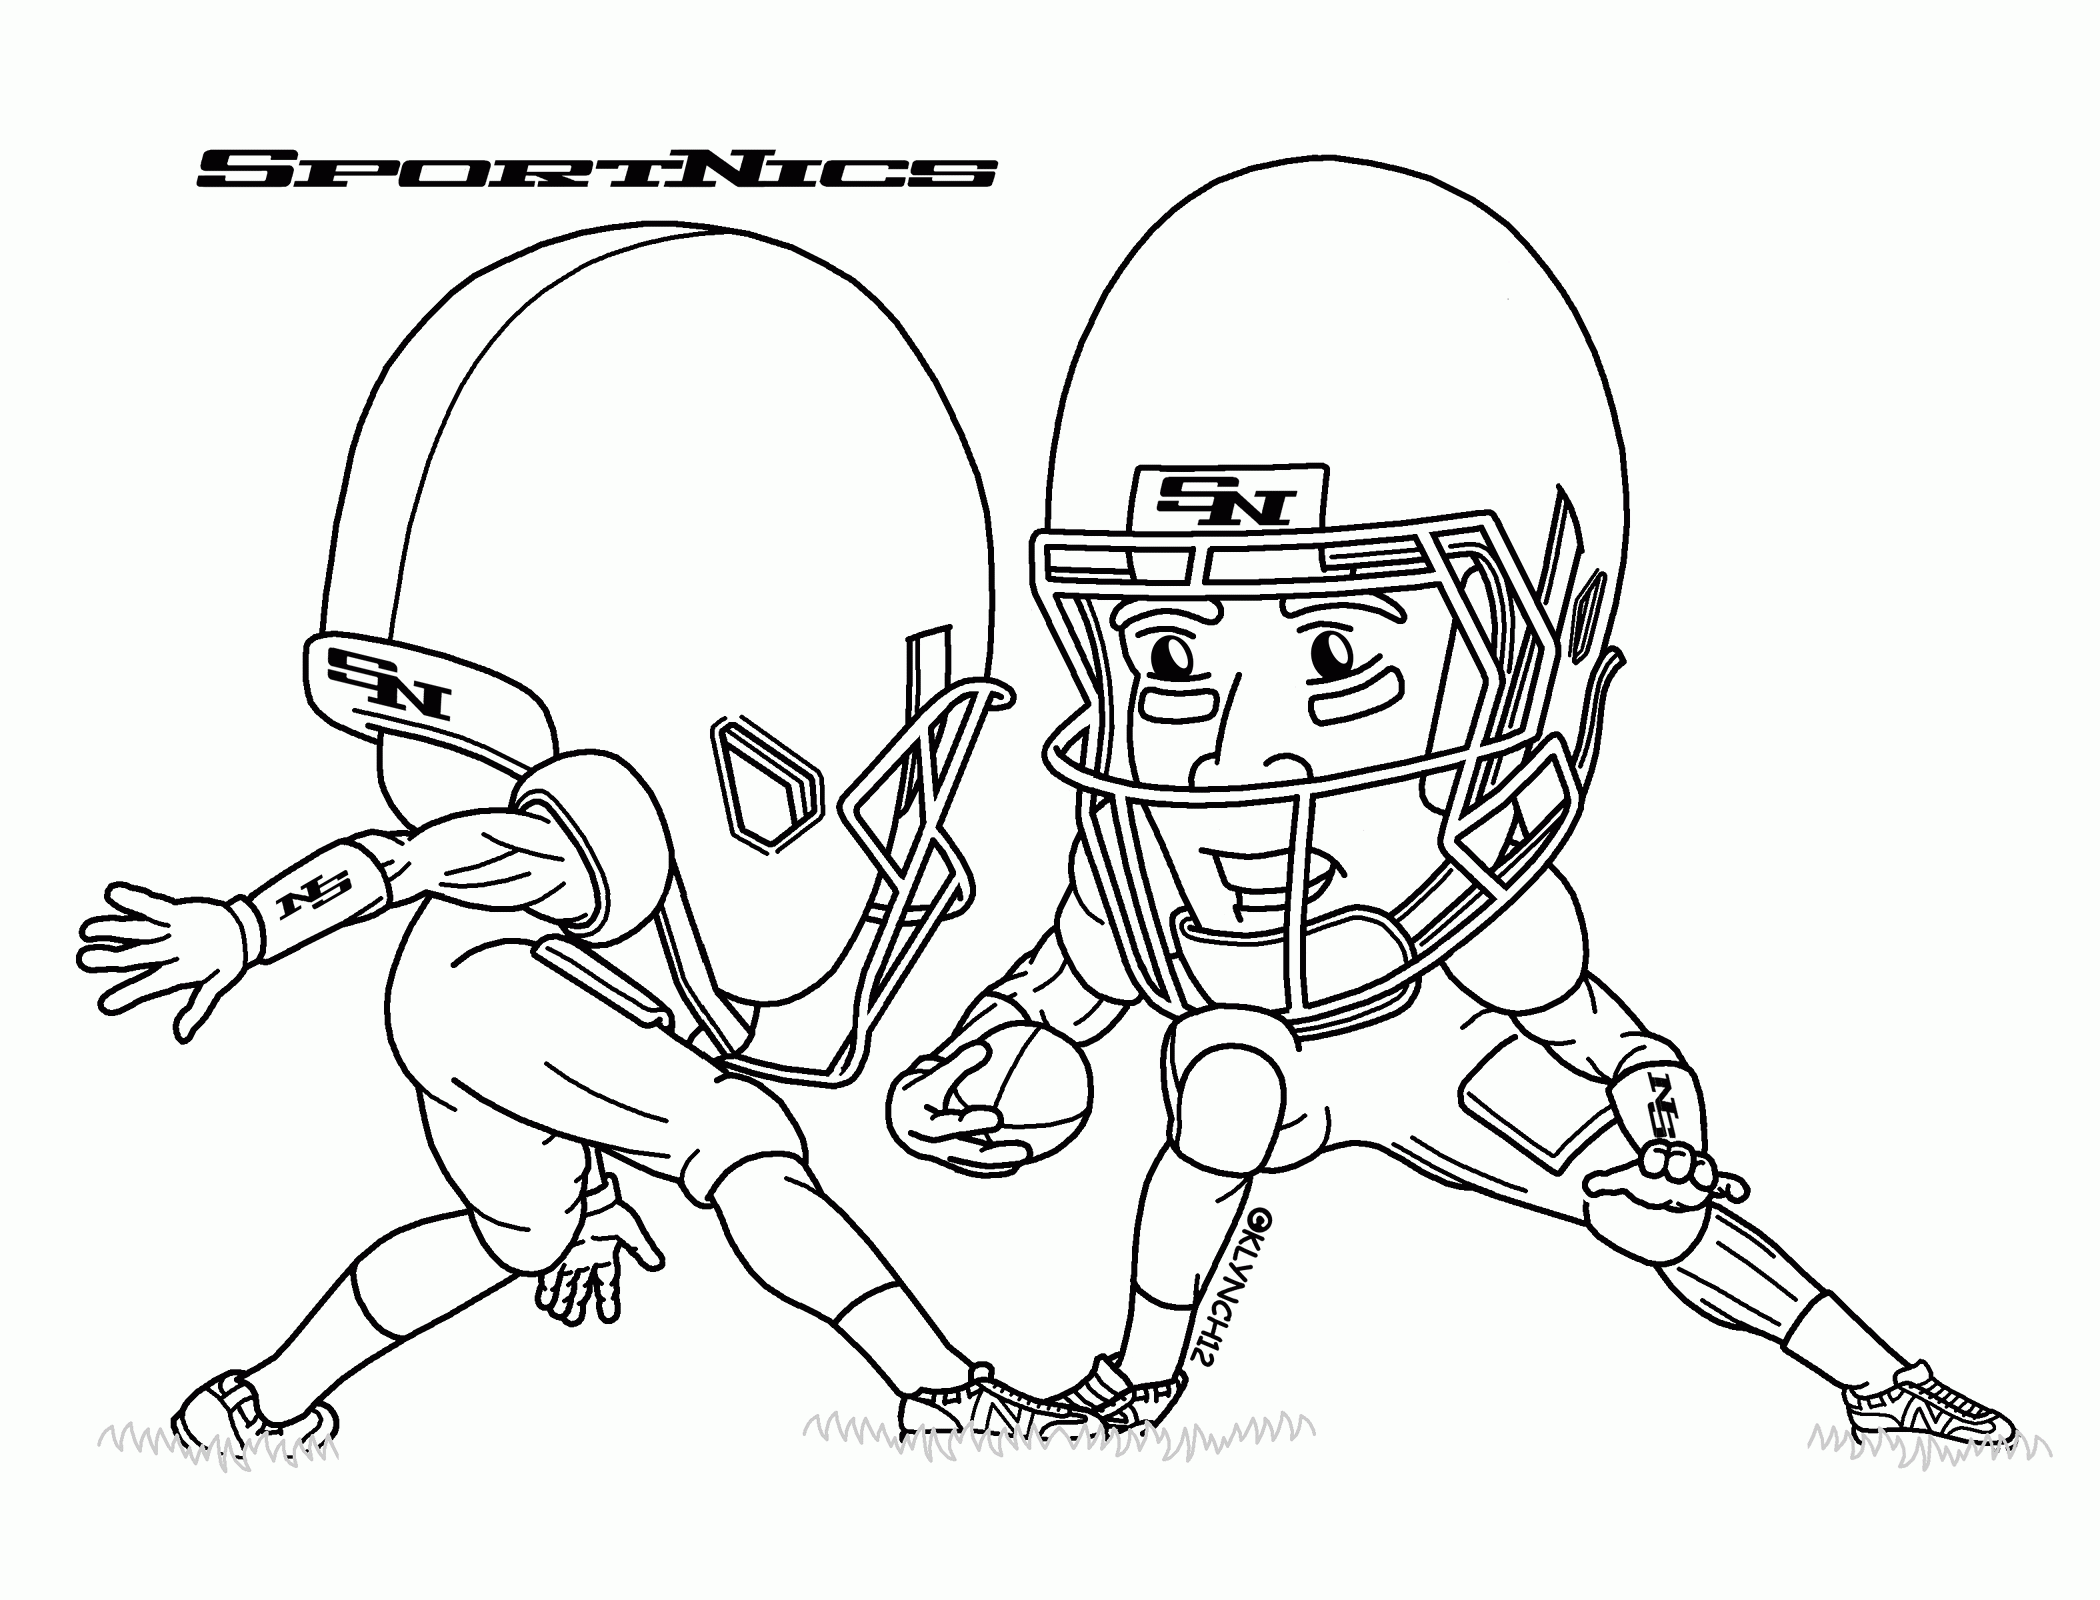 49ers Coloring Pages (18 Pictures) - Colorine.net | 26133